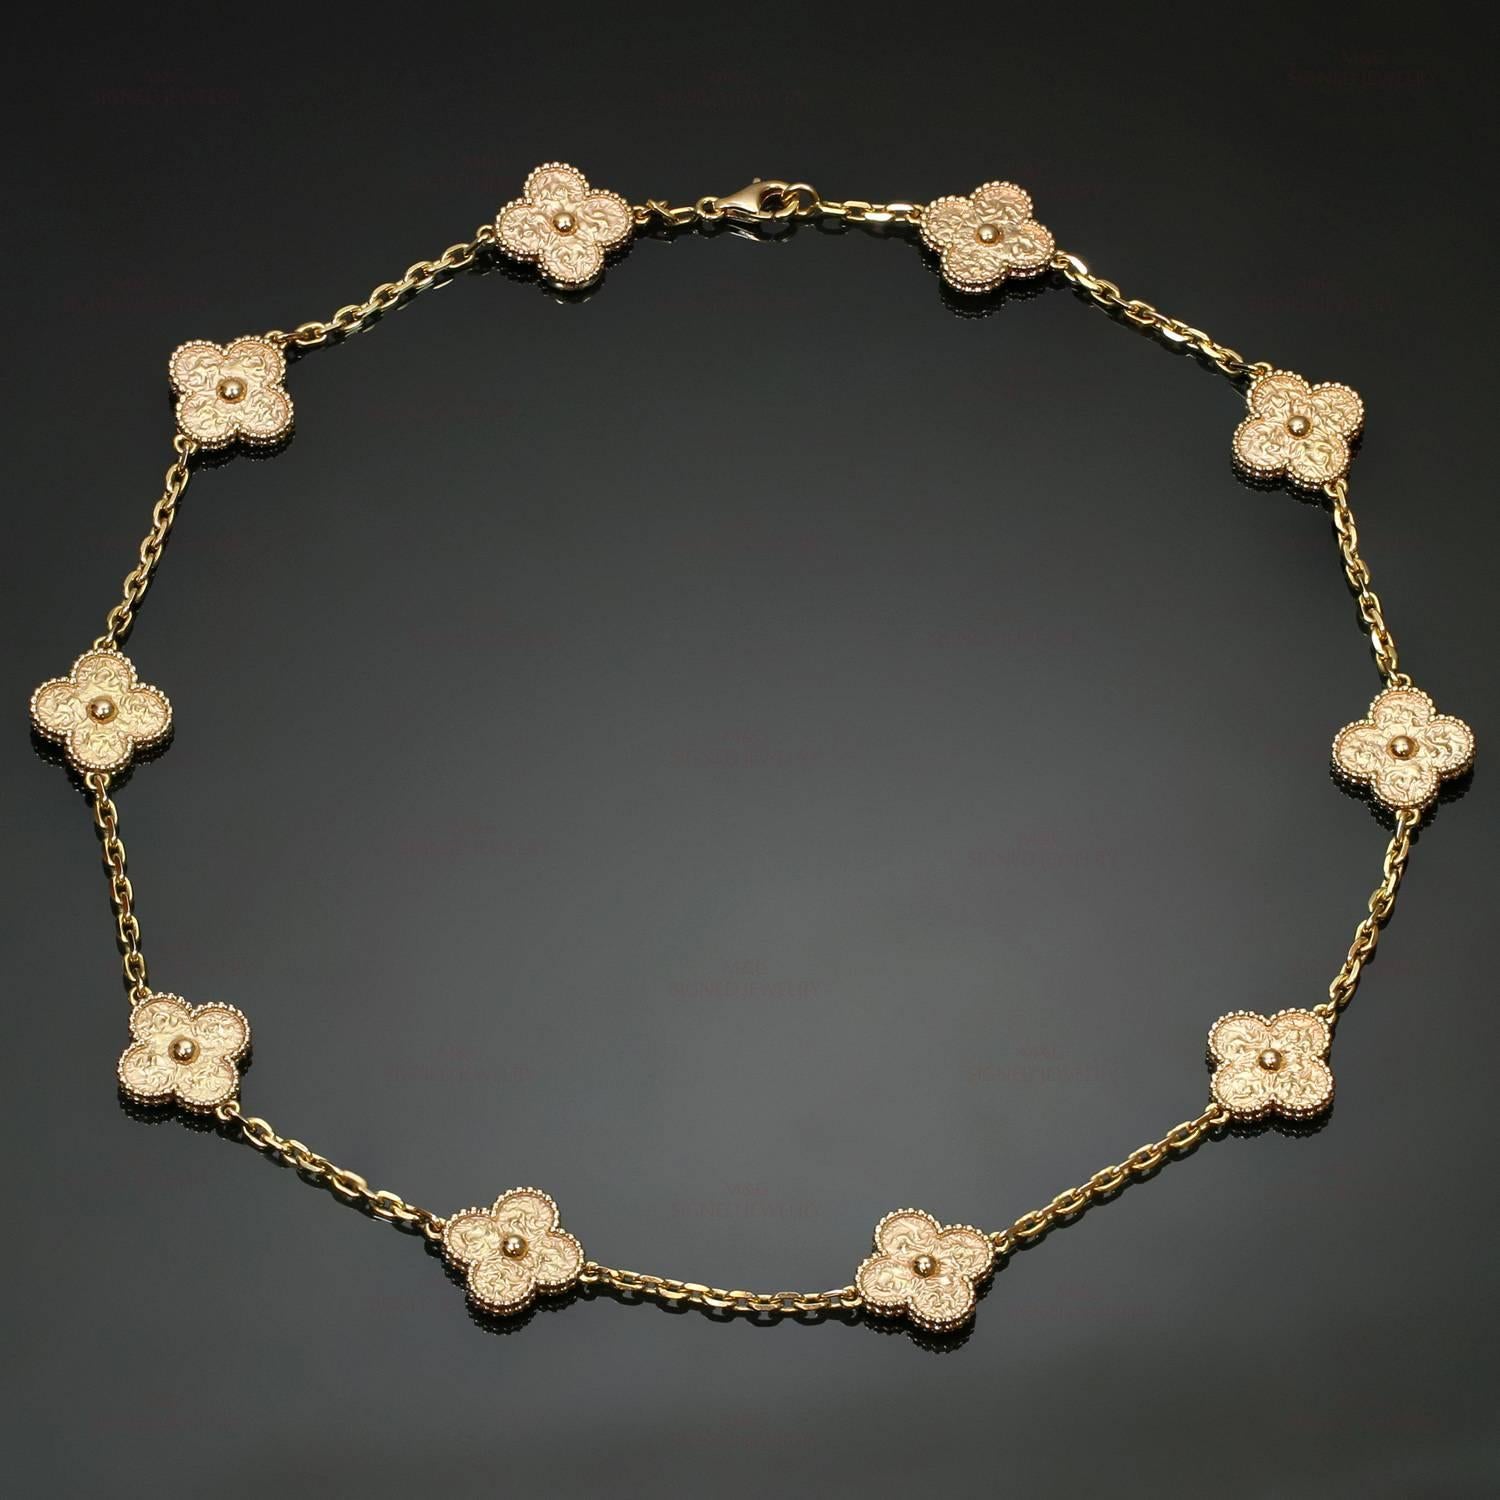 This classic Van Cleef & Arpels necklace from the iconic Vintage Alhambra collection is crafted in 18k rose gold and features 10 lucky clover motifs with round bead edges. Made in France circa 2000s. Measurements: 16.5